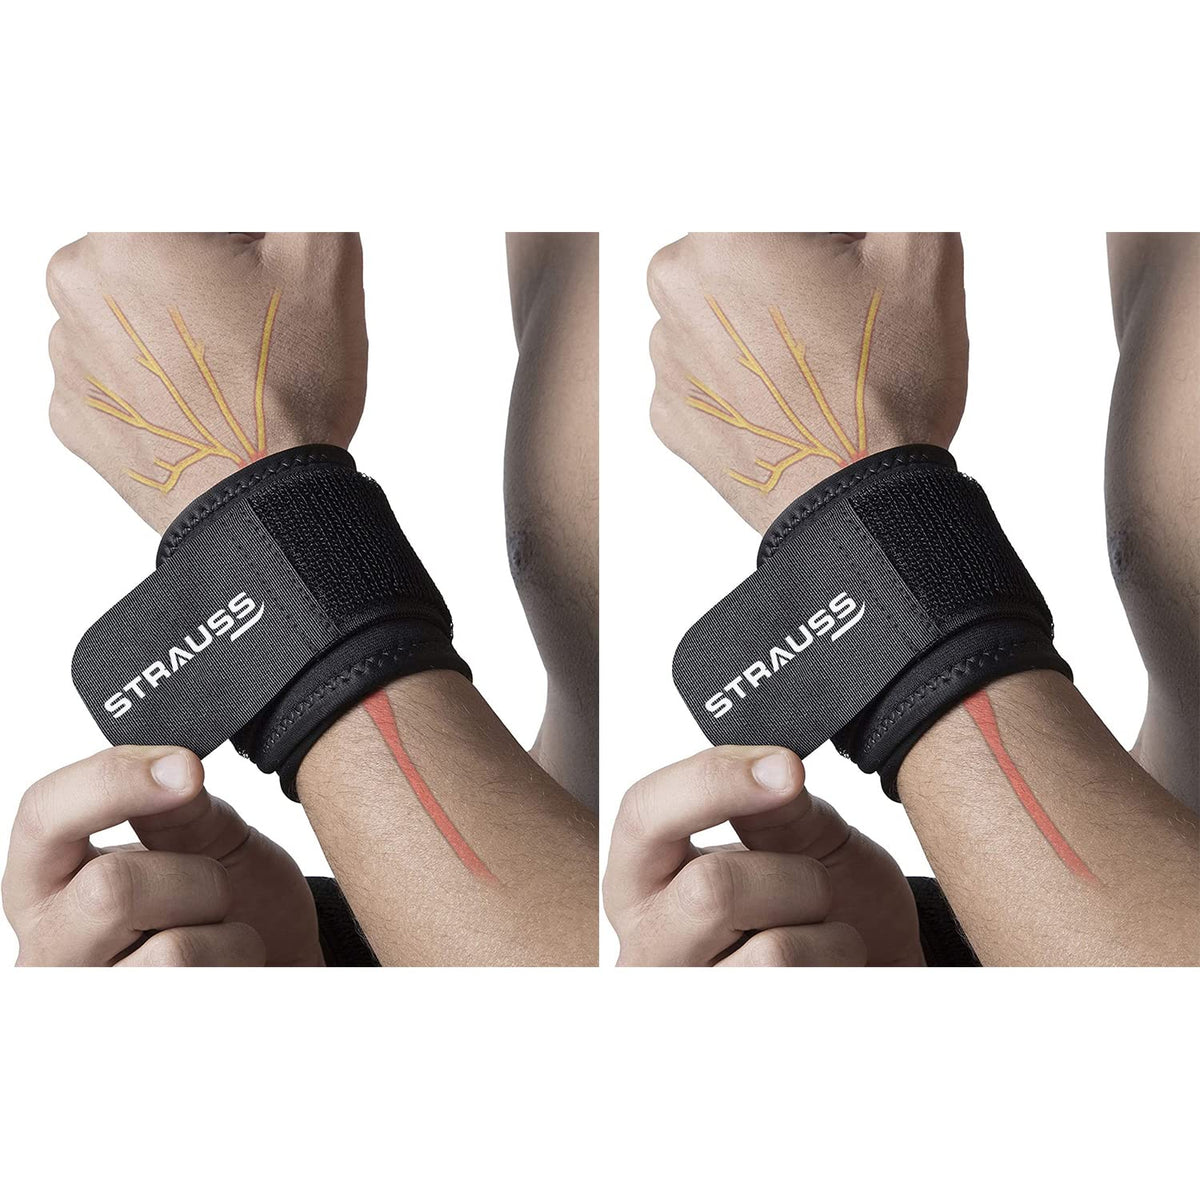 Strauss Wrist Support, Single (Free Size, Black), (Pack of 2)